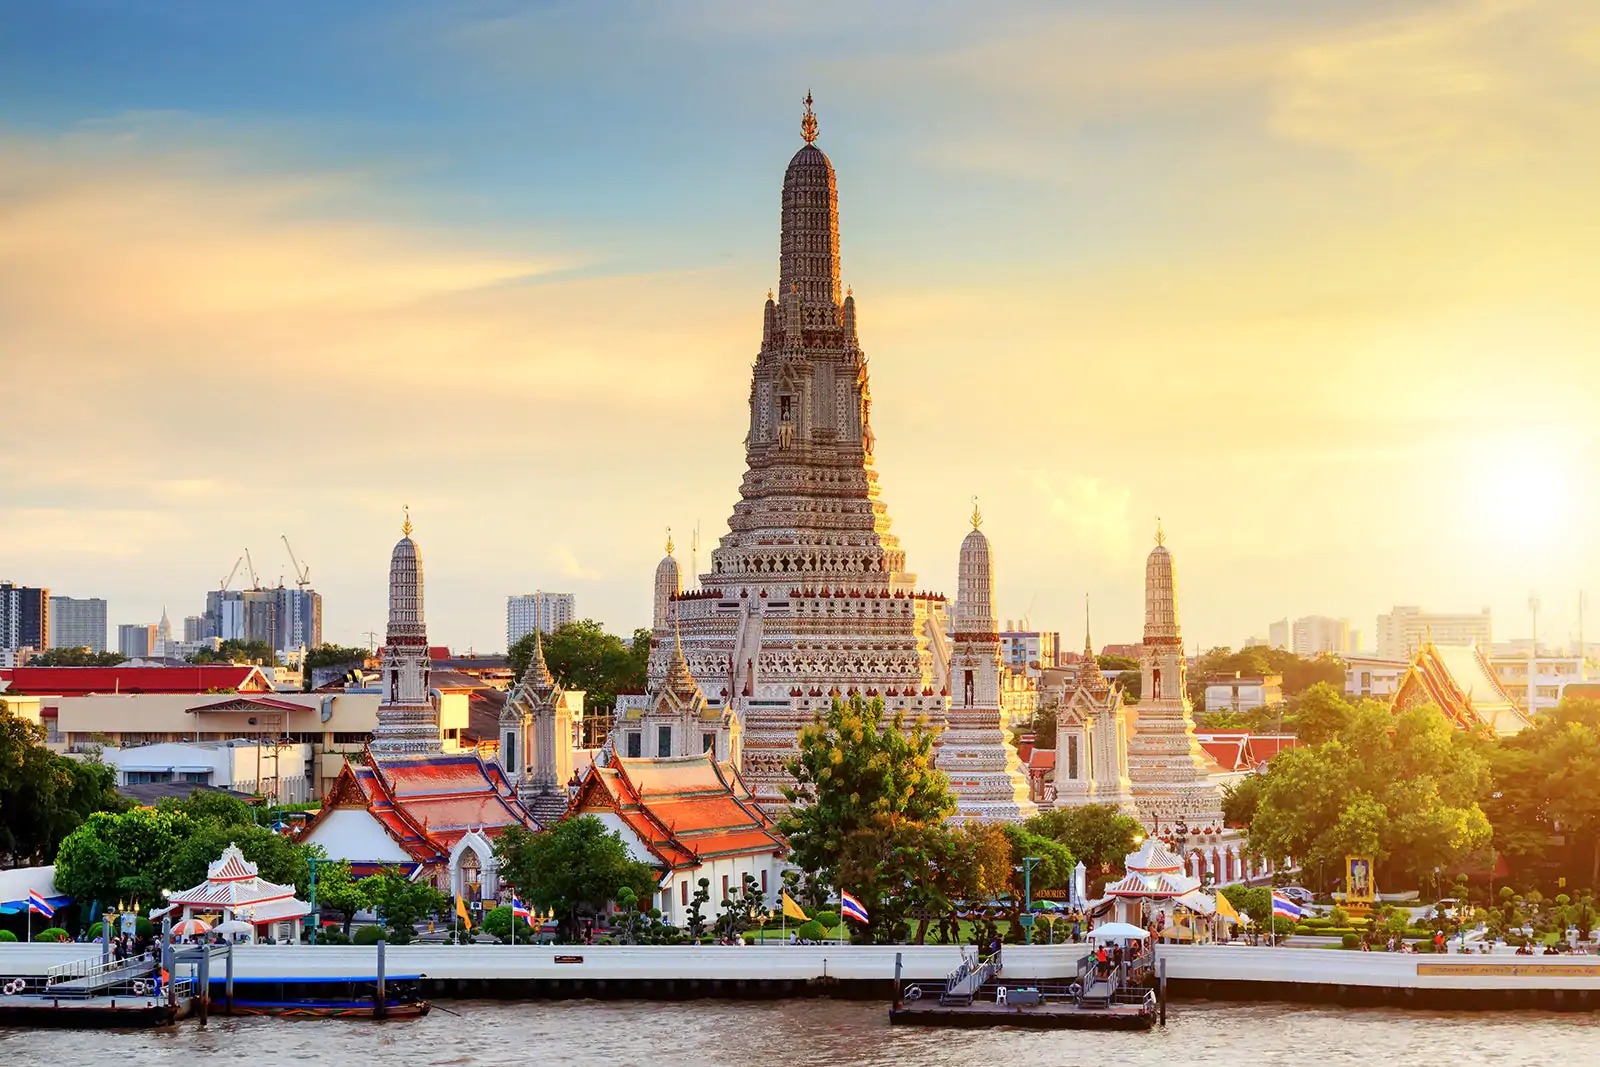 Second Most Famous Sights Wat Arun In Bangkok Temple Of Dawn, Thailand